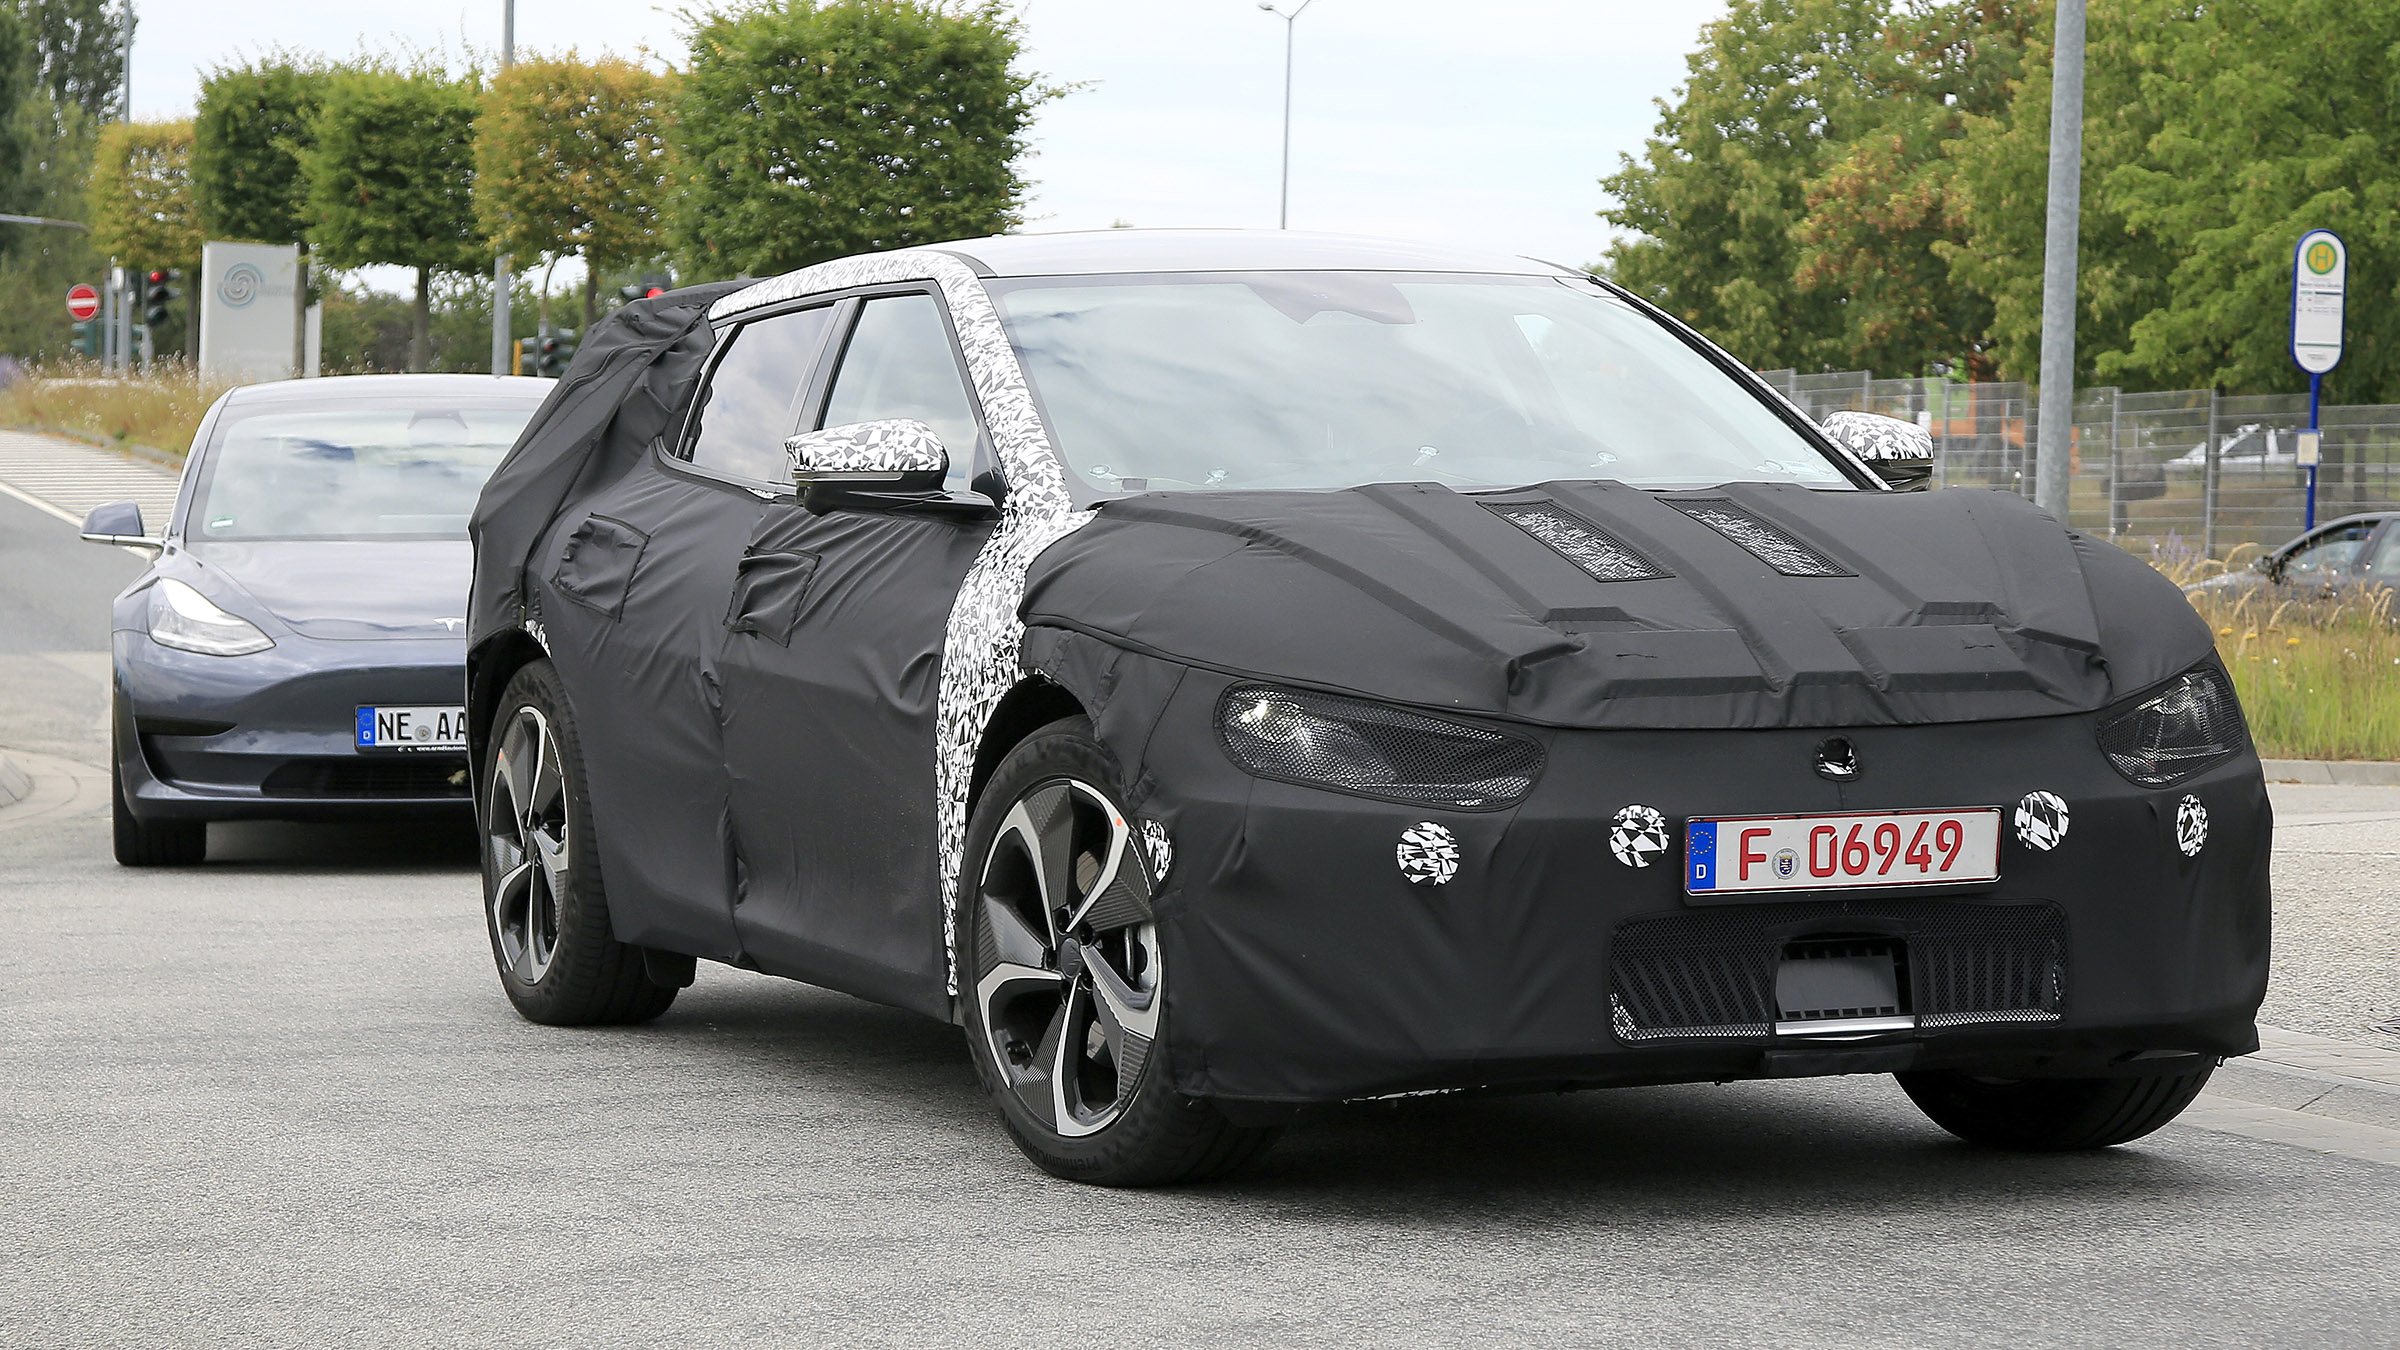 21 Kia Electric Coupe Suv Flagship Model In Development Carbuyer